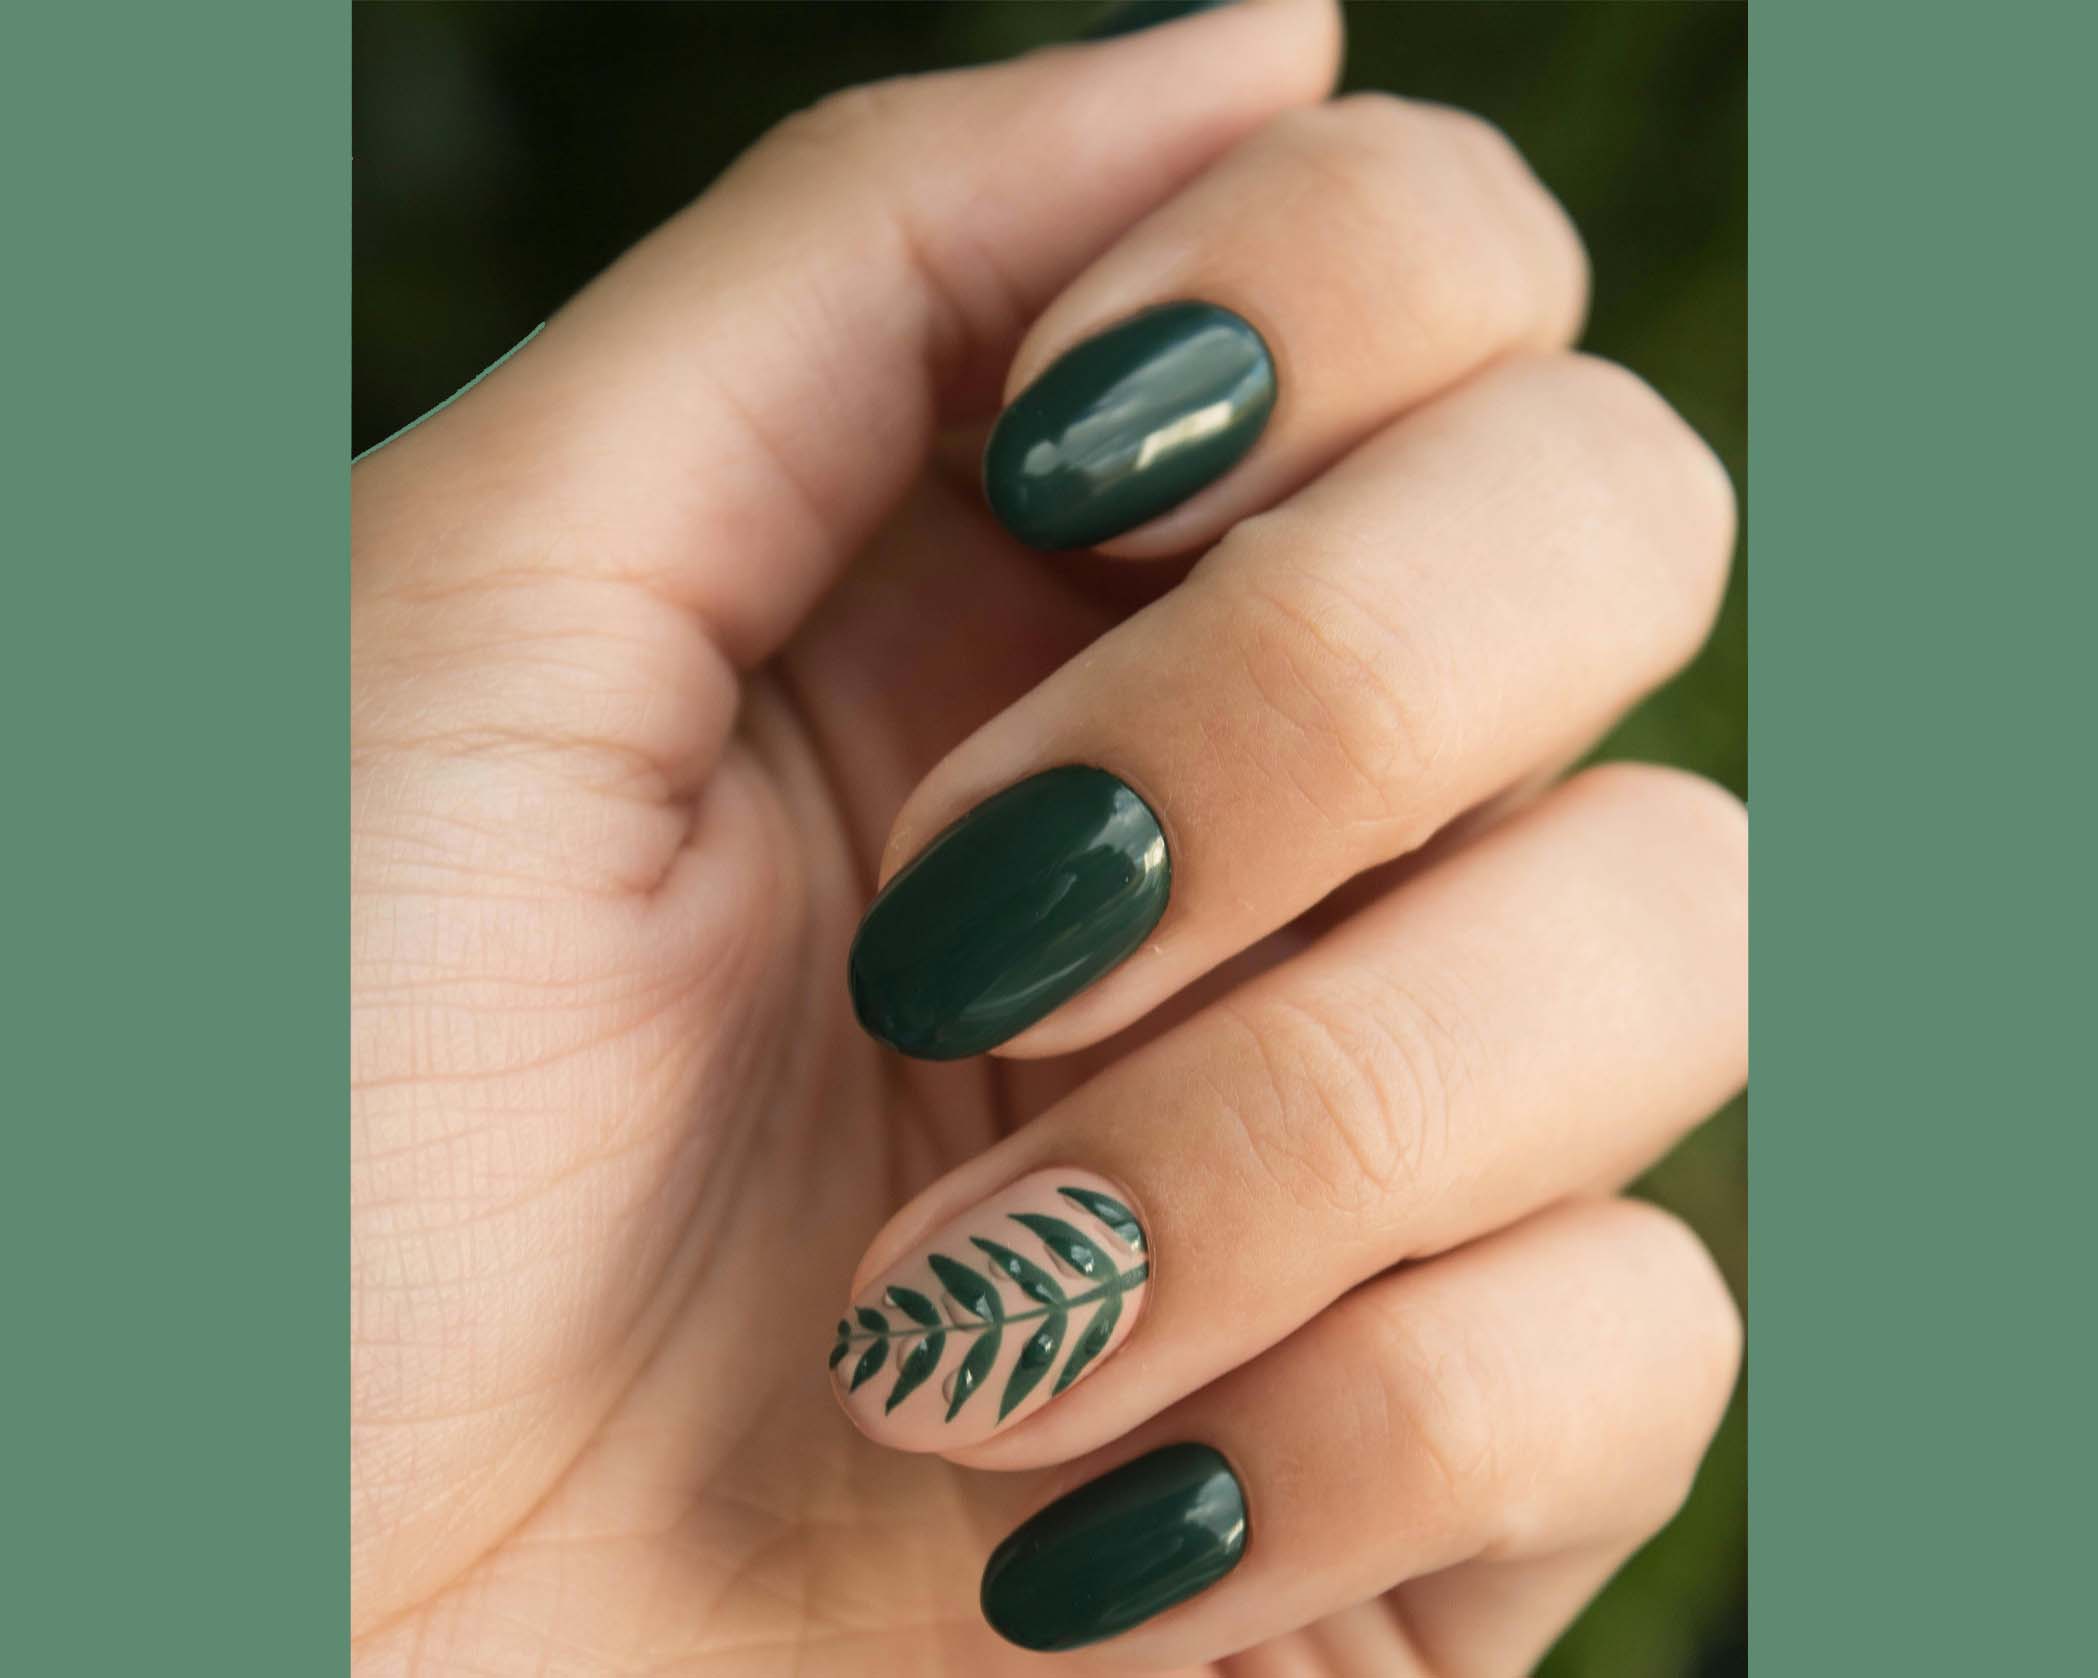 close up shot of a model's hand with green nails with a leaf design